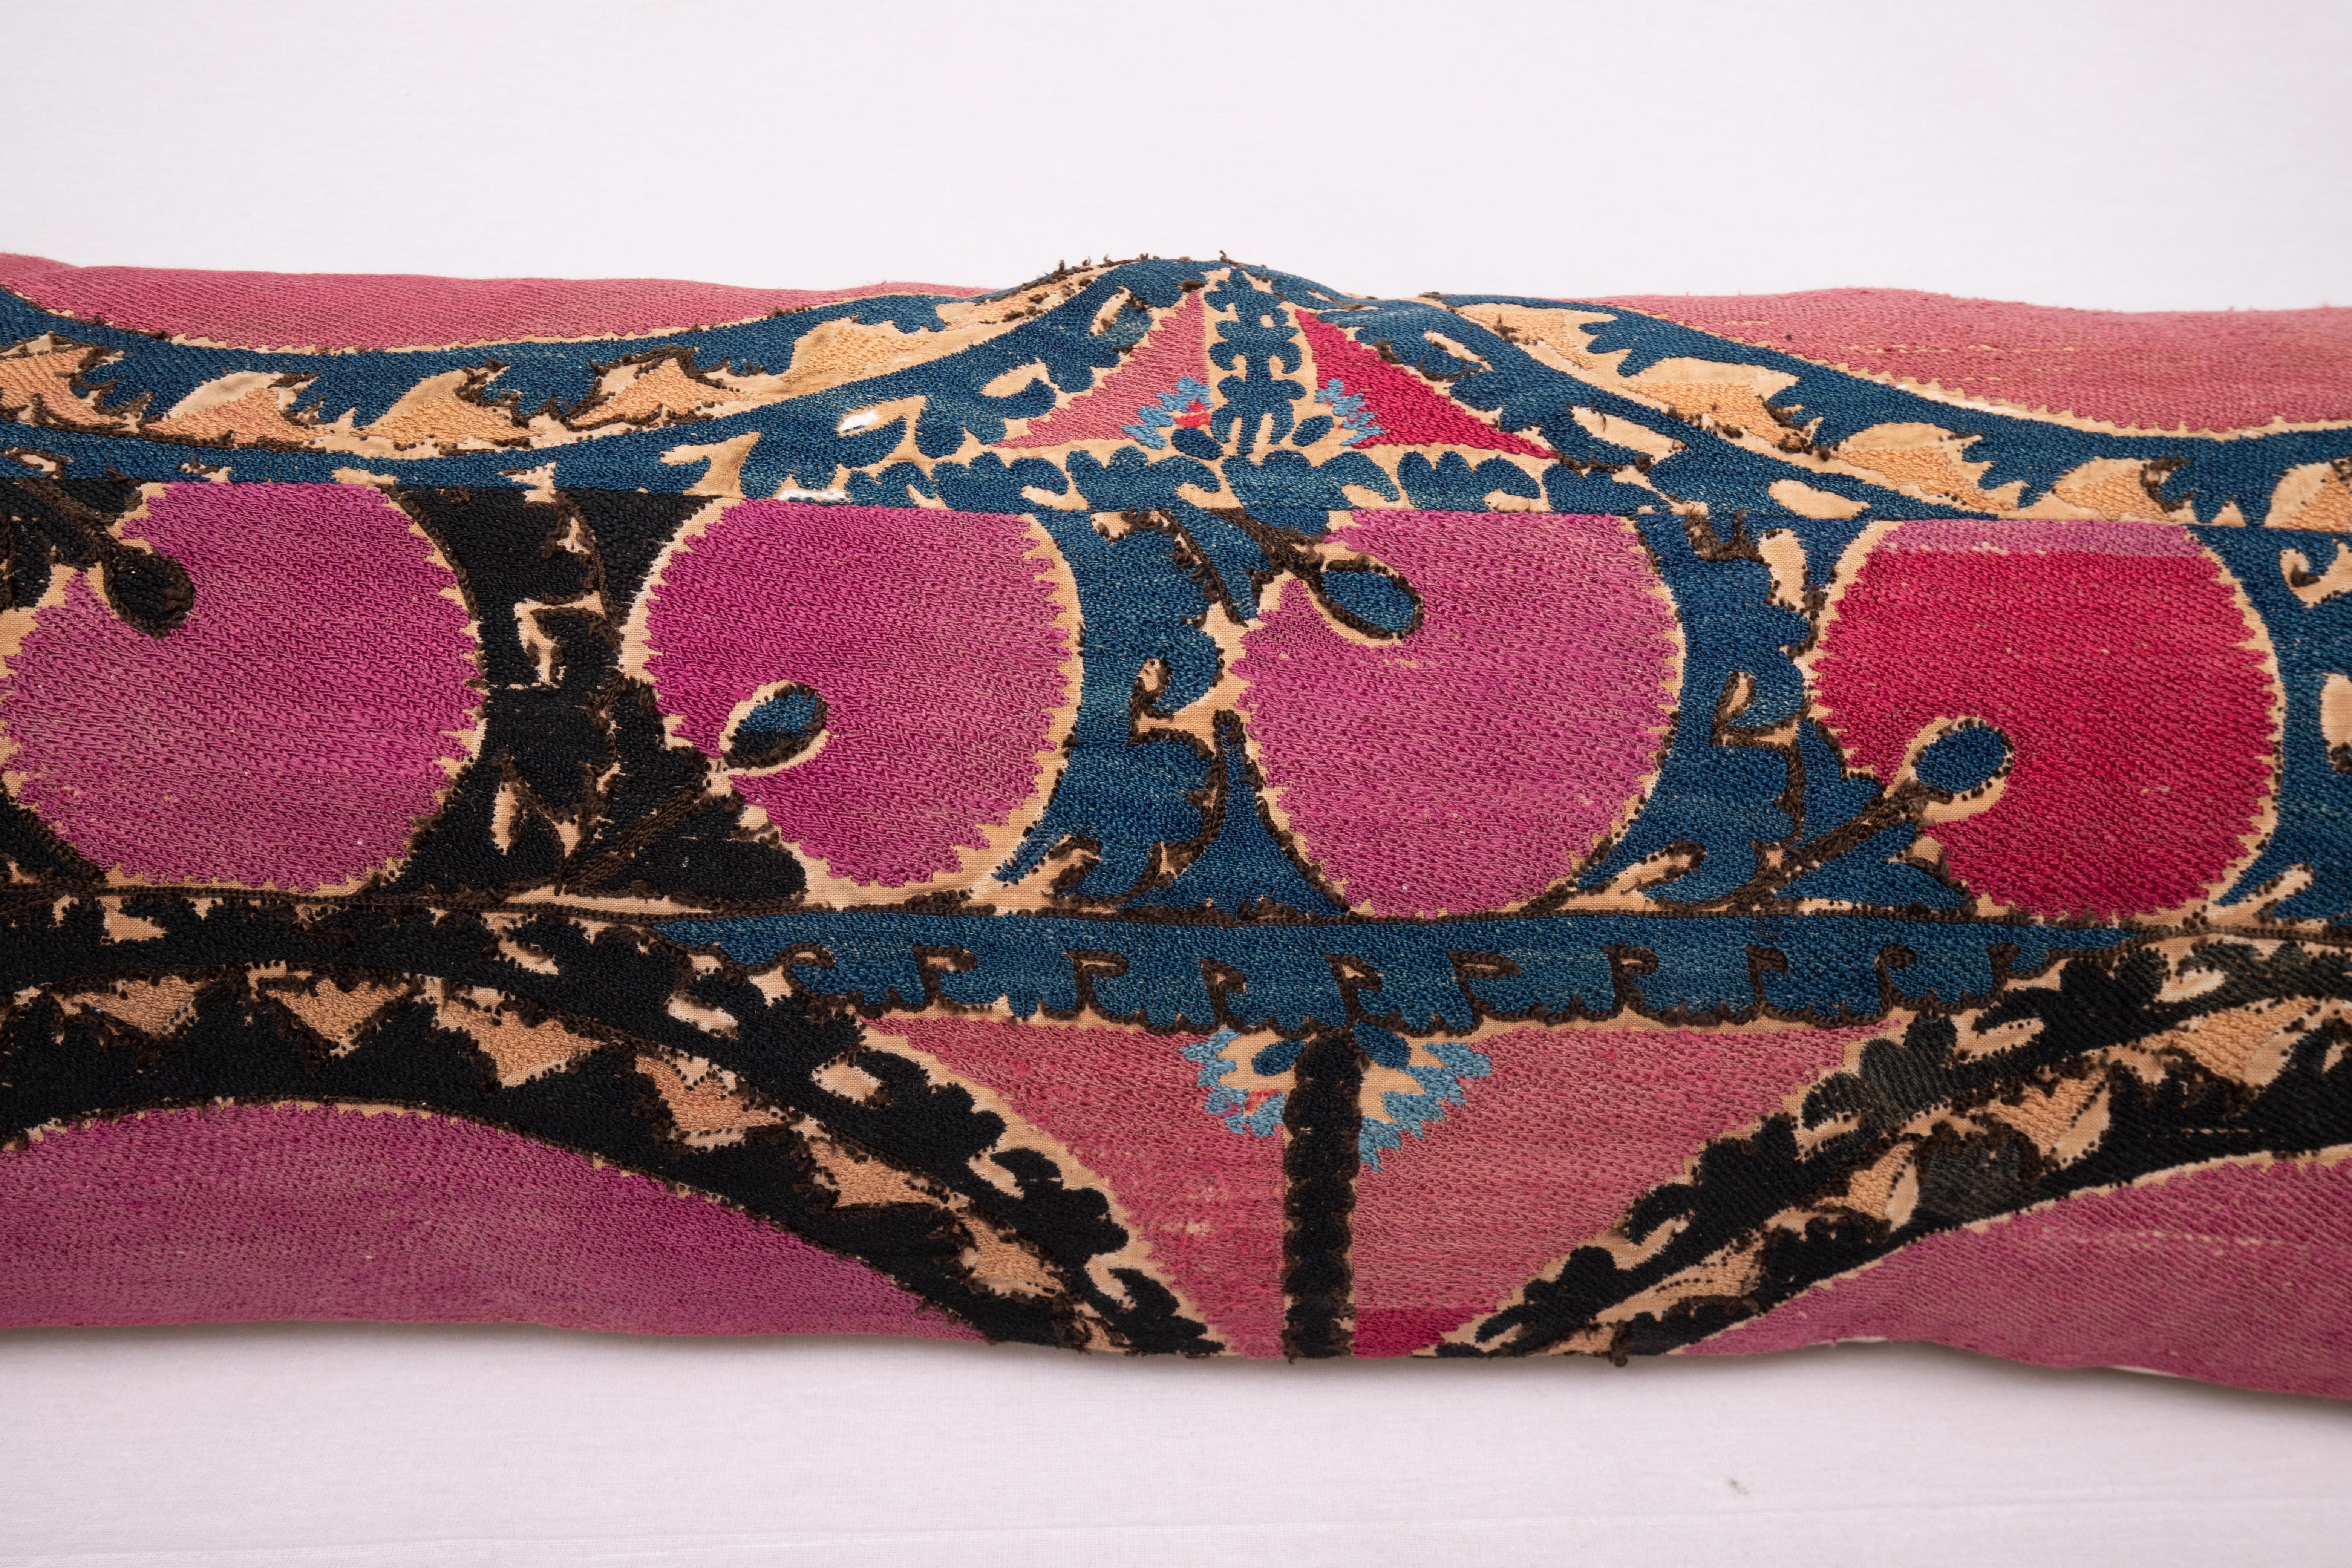 Embroidered Antique Suzani Pillowcase Made from a late 19th C. Tashkent Suzani Fragment